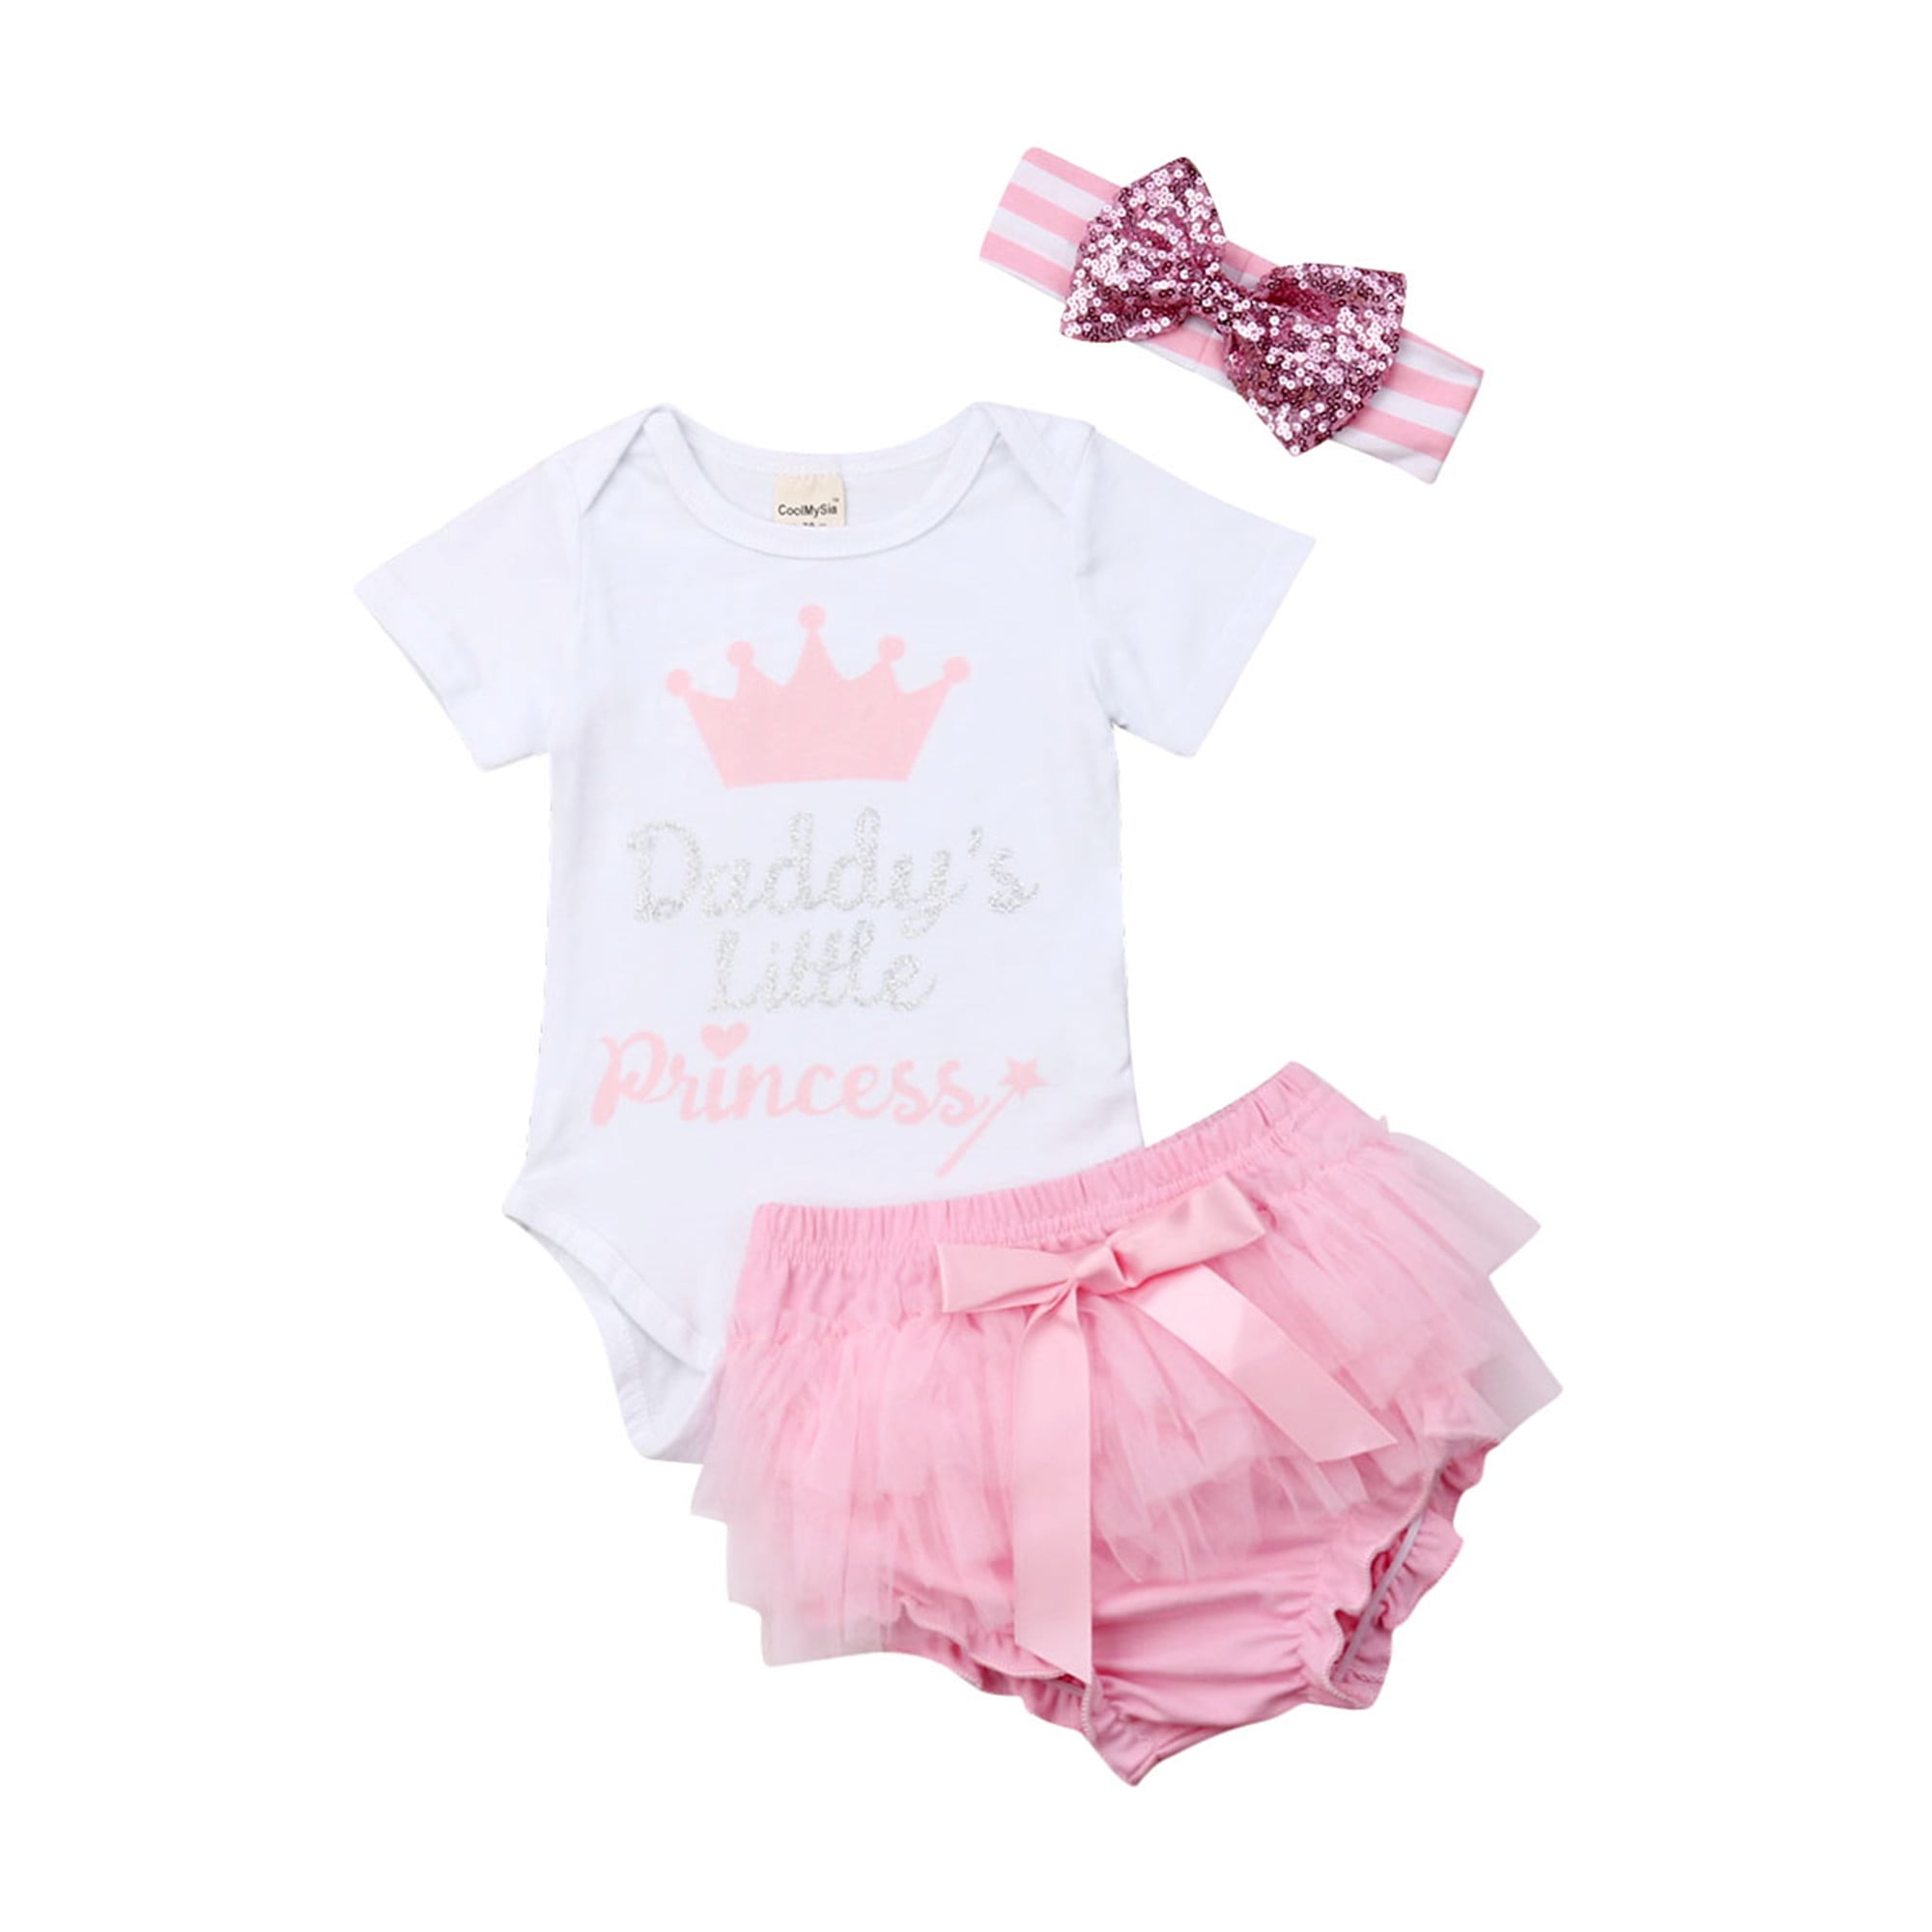 UK Daddy's Princess Kid Baby Girl Romper Tops Tulle Shorts Pants Outfit Sunsuit 